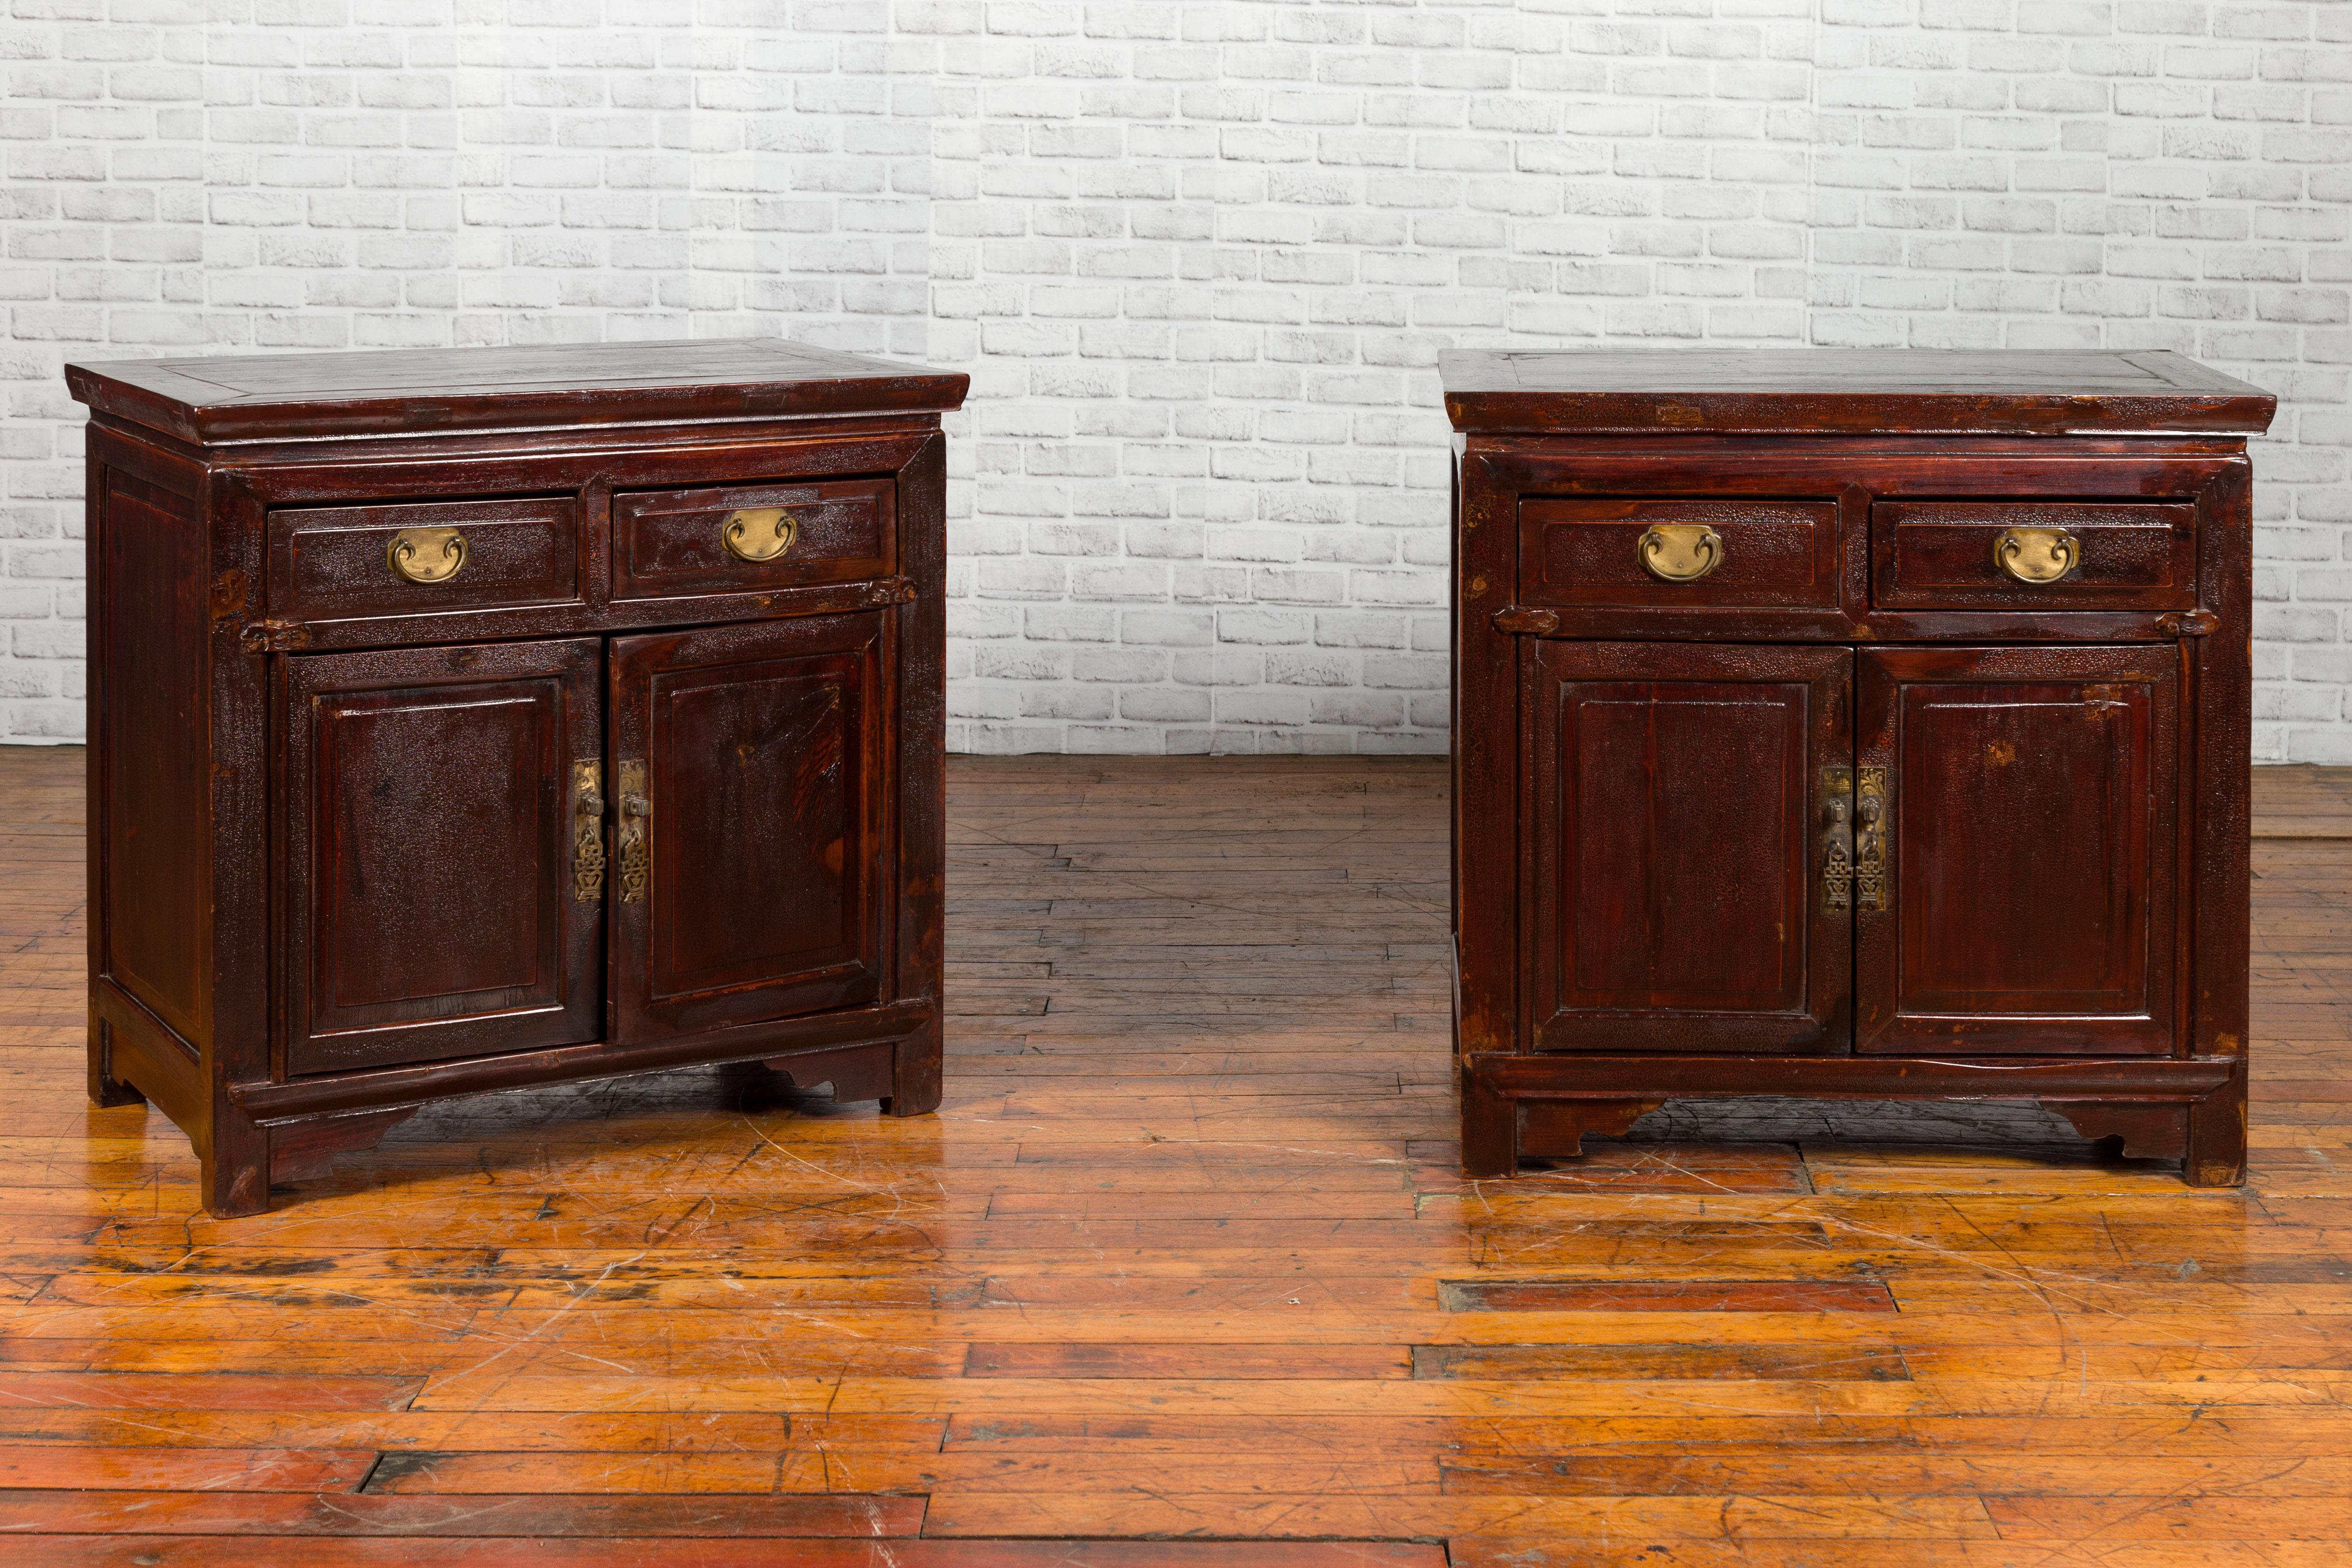 Lacquered Pair of Early 20th Century Chinese Bedside Cabinets with Reddish Brown Lacquer